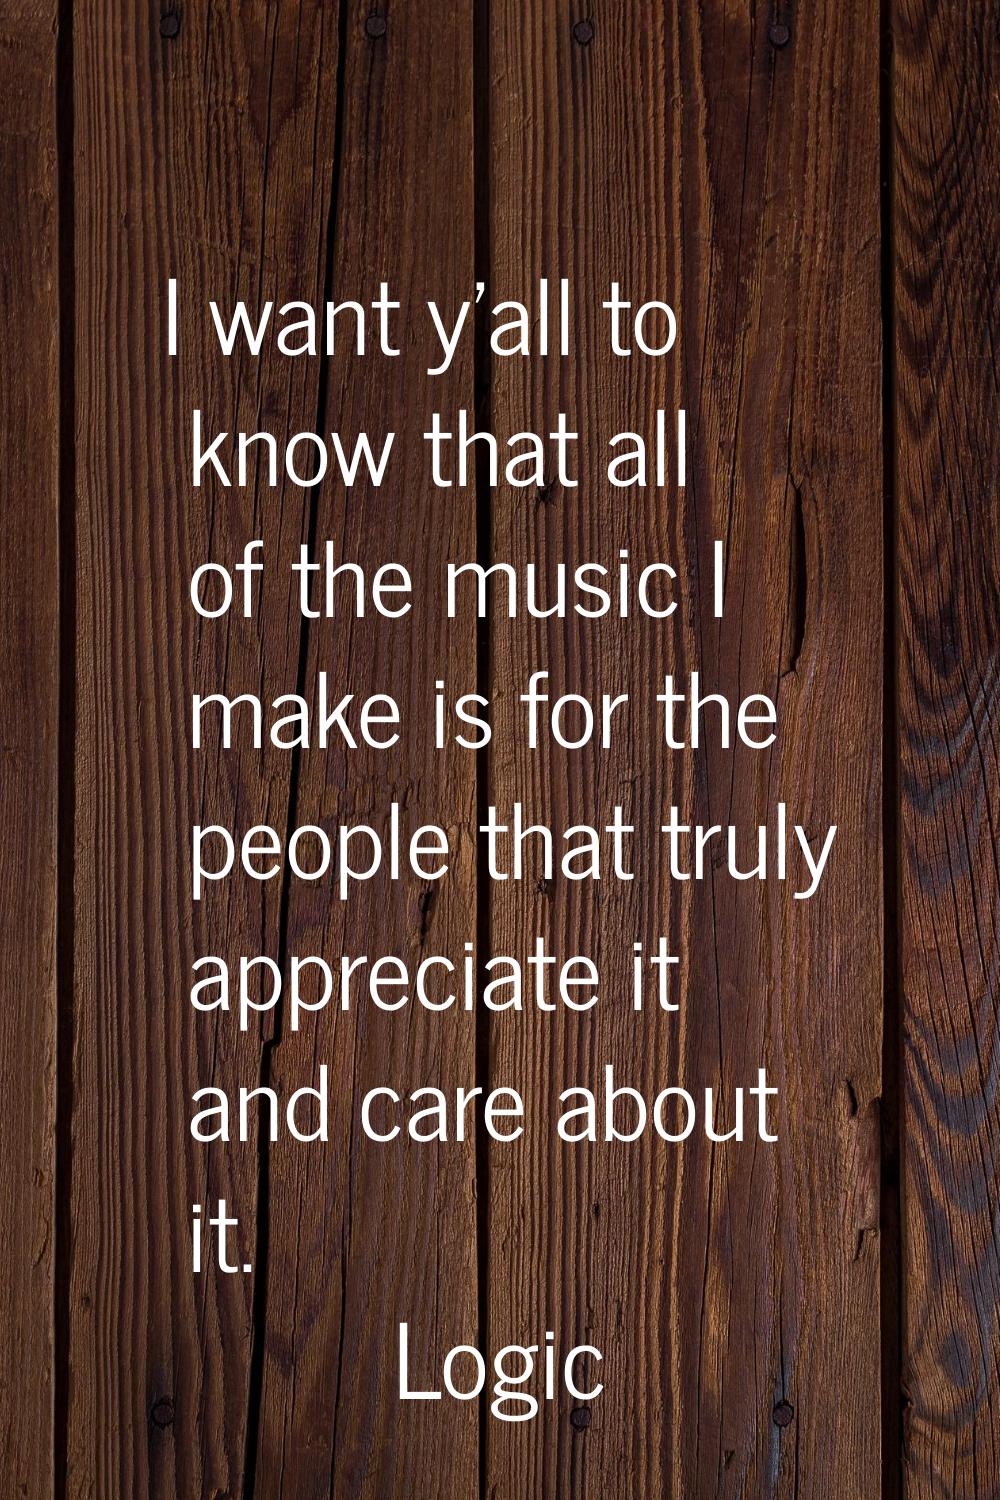 I want y'all to know that all of the music I make is for the people that truly appreciate it and ca